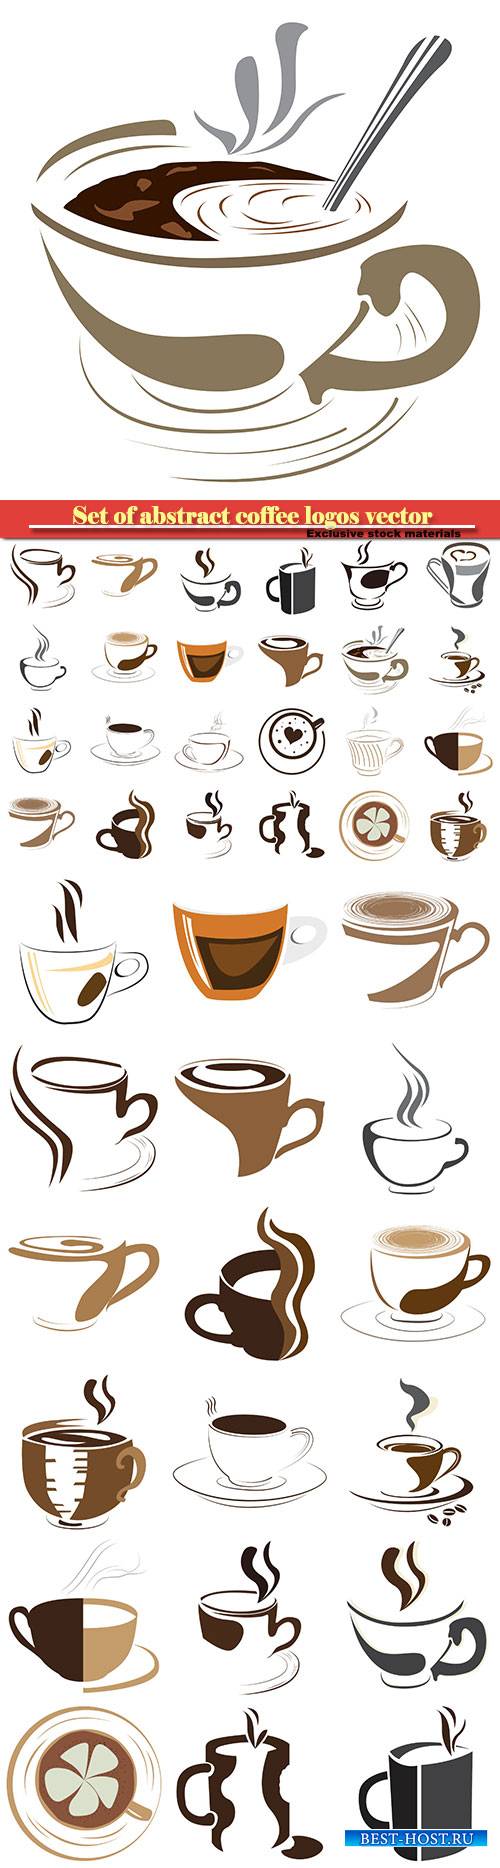 Set of abstract coffee logos vector illustration